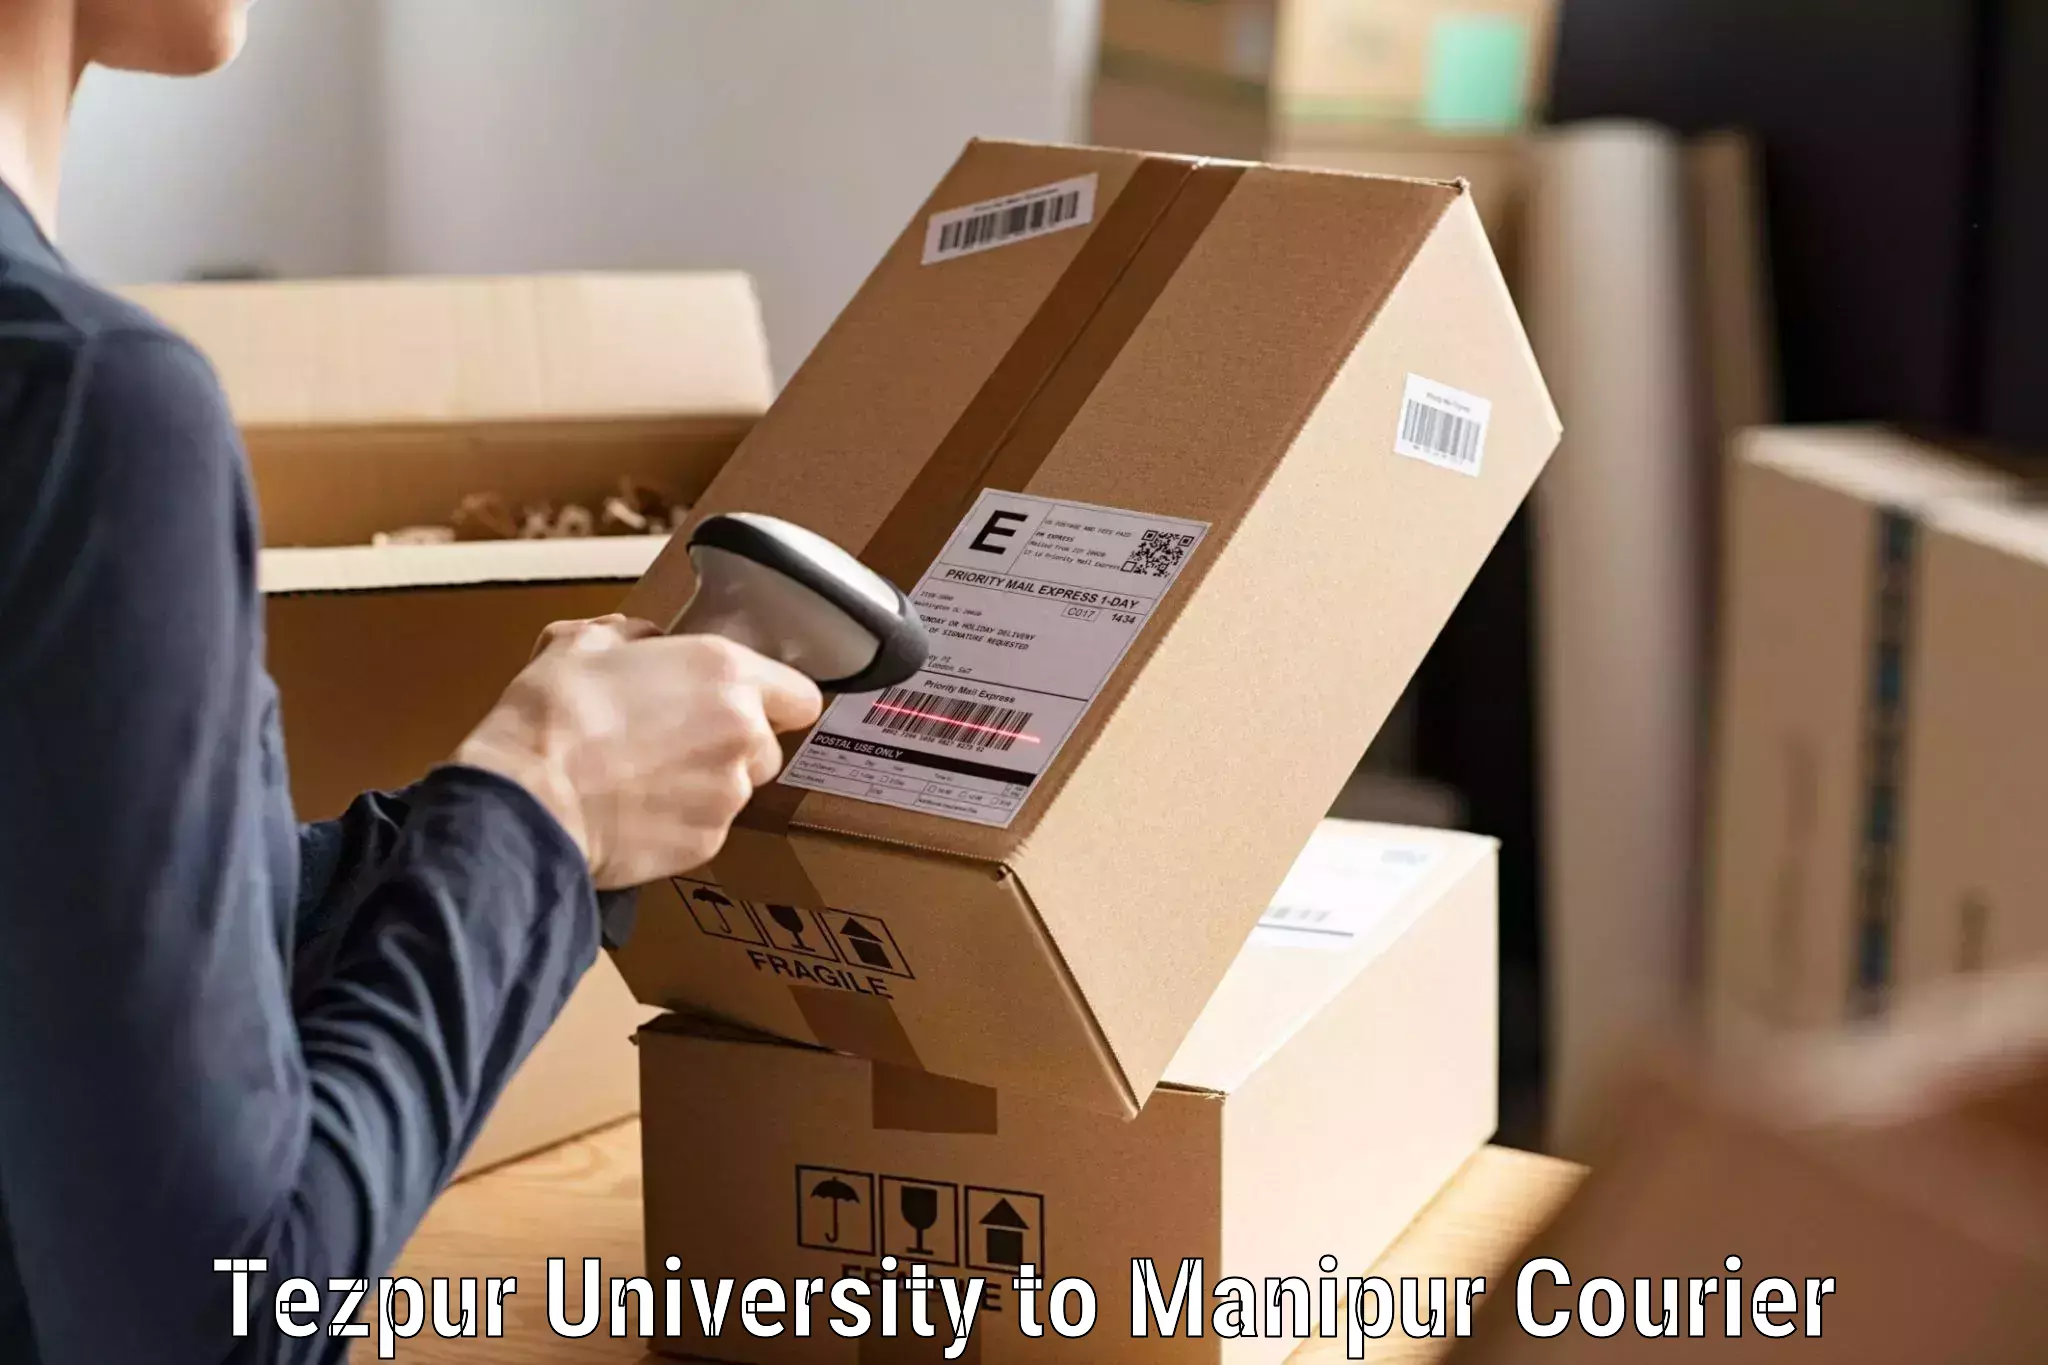 Parcel delivery in Tezpur University to Manipur